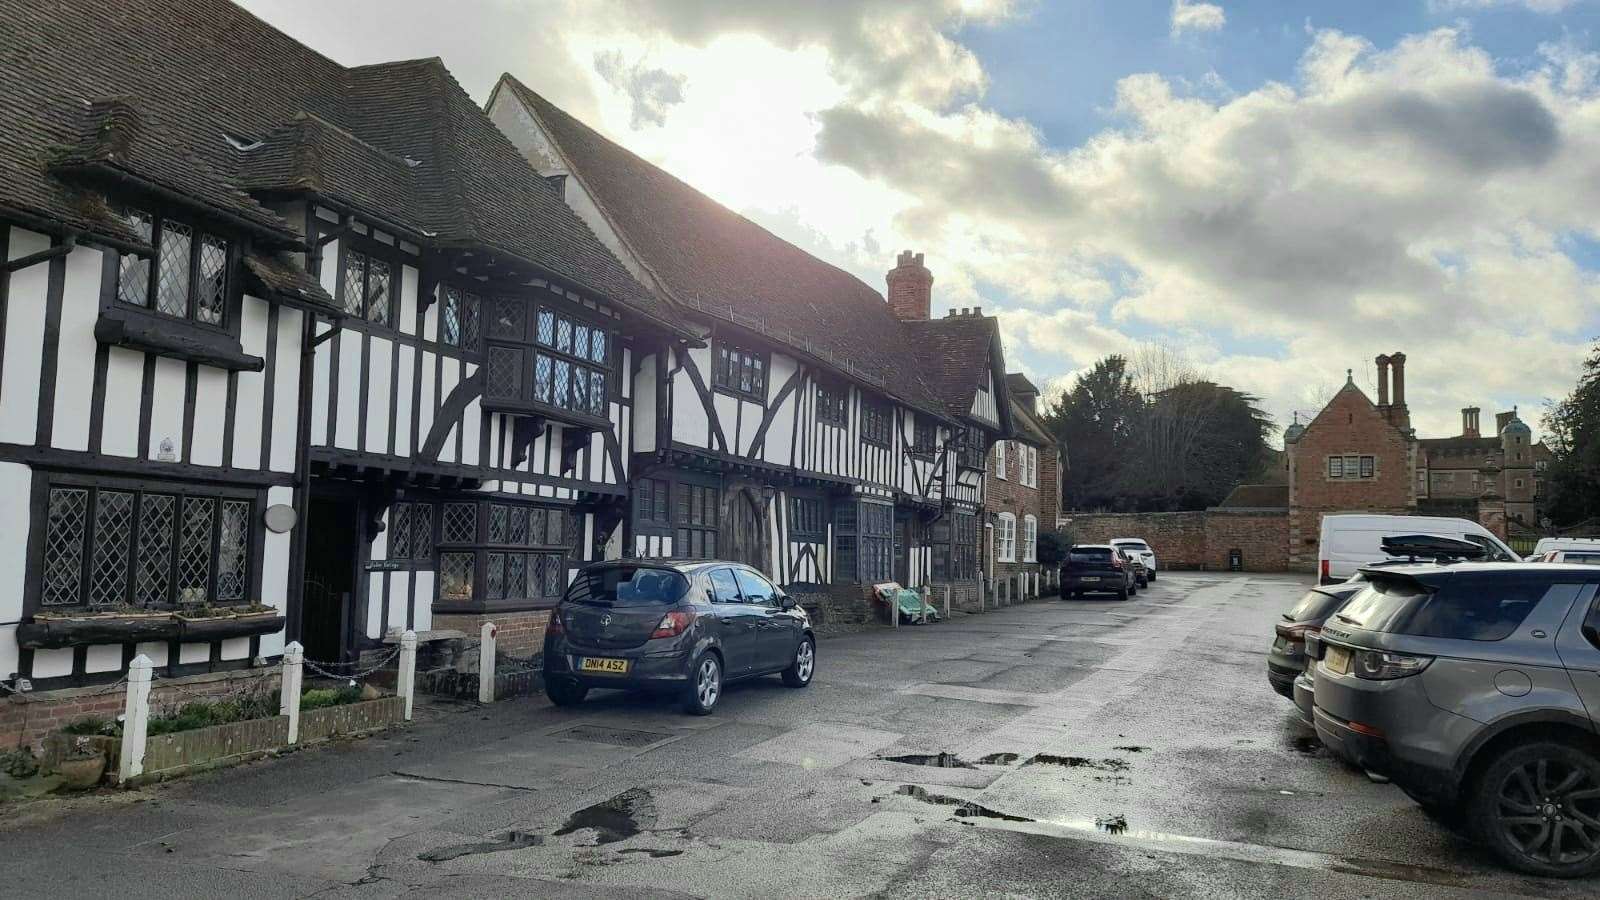 The plans for a Chilham wine venue attracted a number of objections